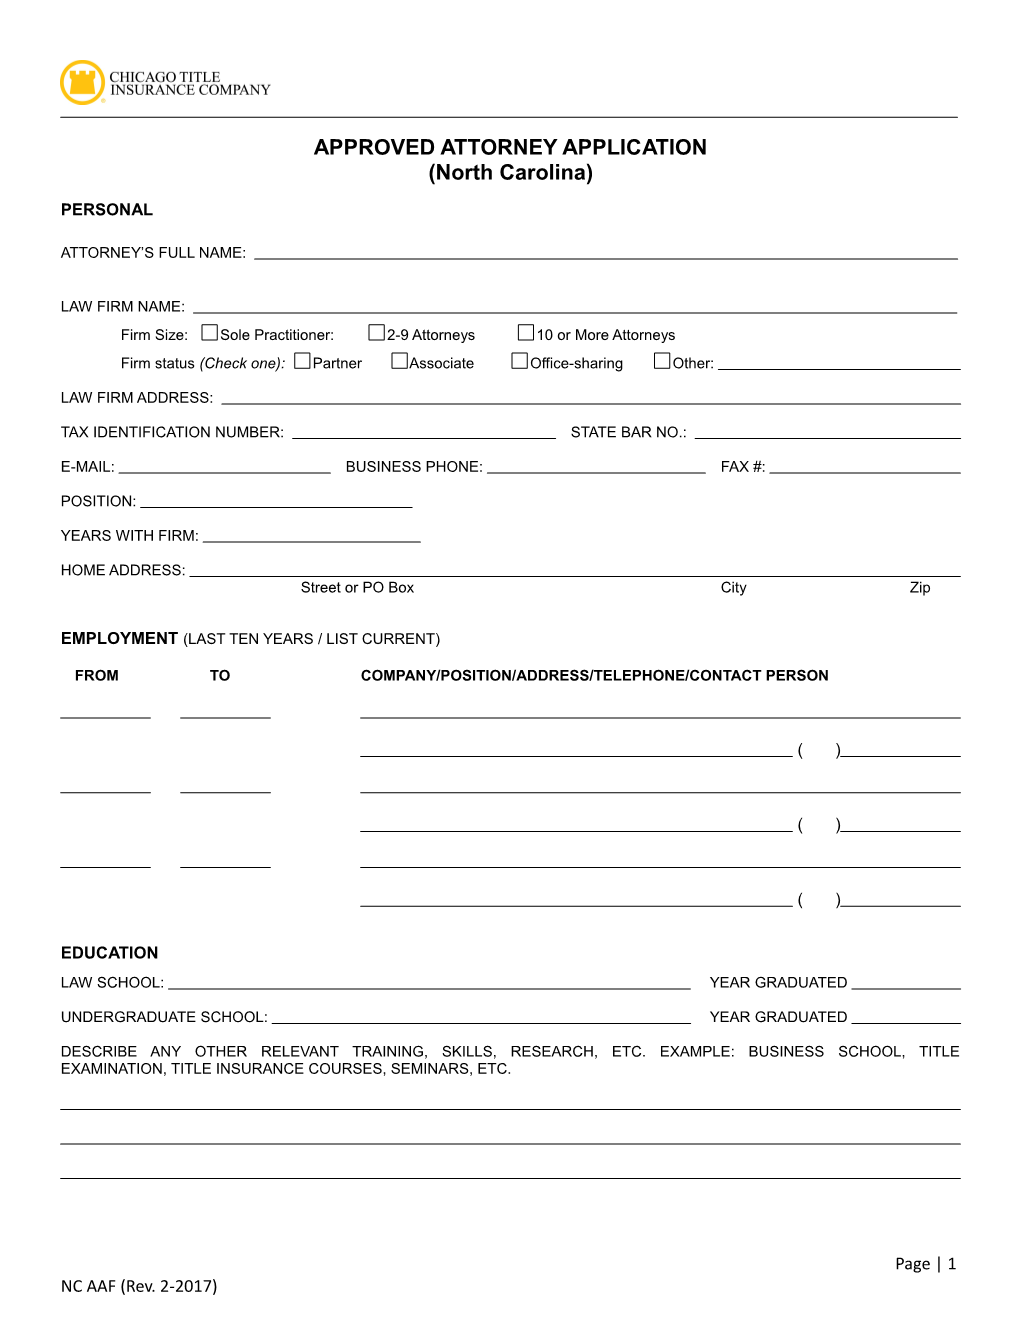 Approved Attorney Application